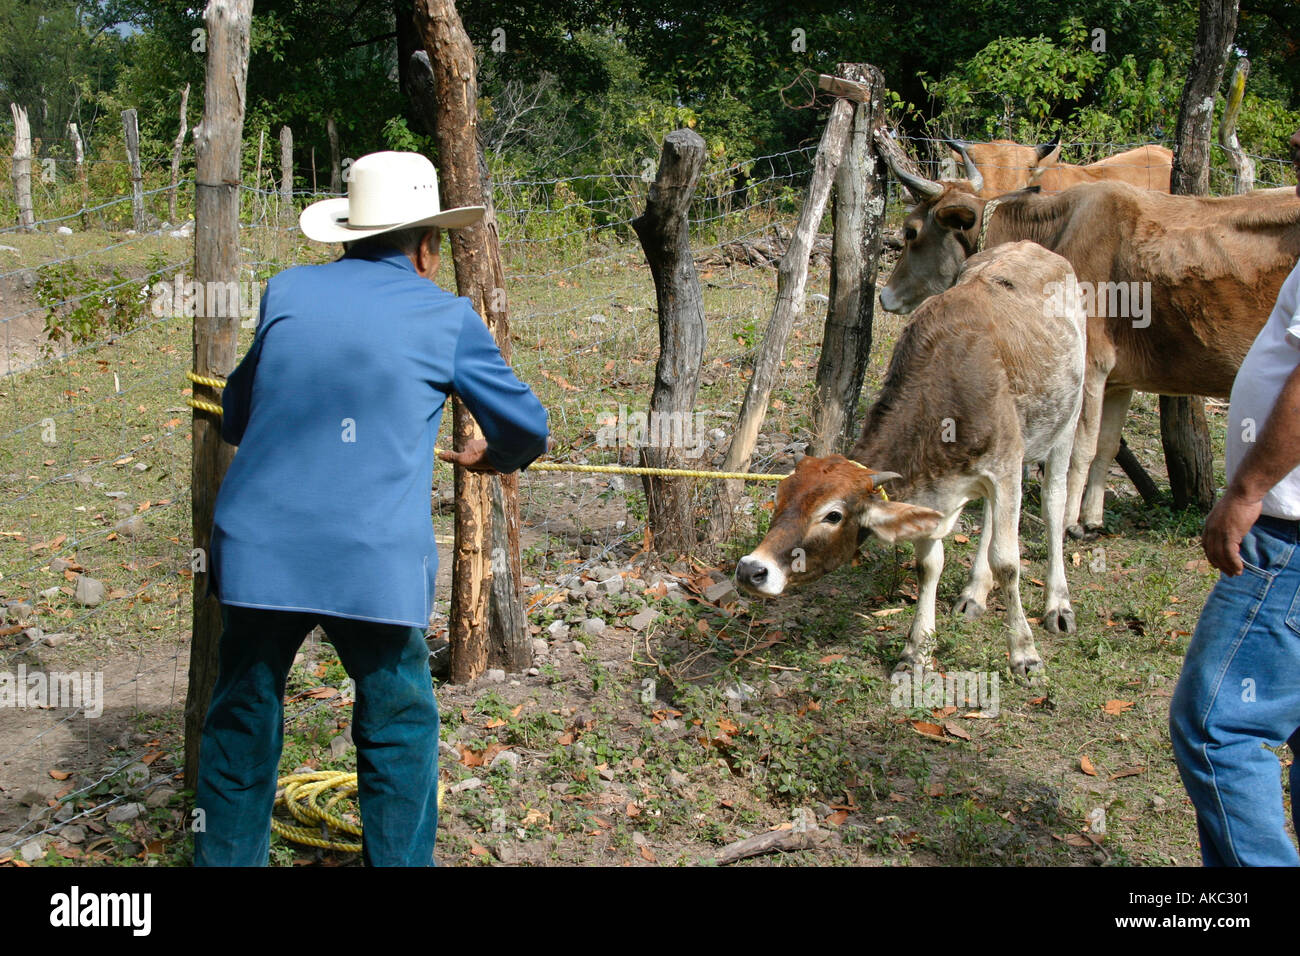 Elderly Mexican rancher ties up a young cow after capturing it with a lasso Sierra Madre mountains Mexico Stock Photo